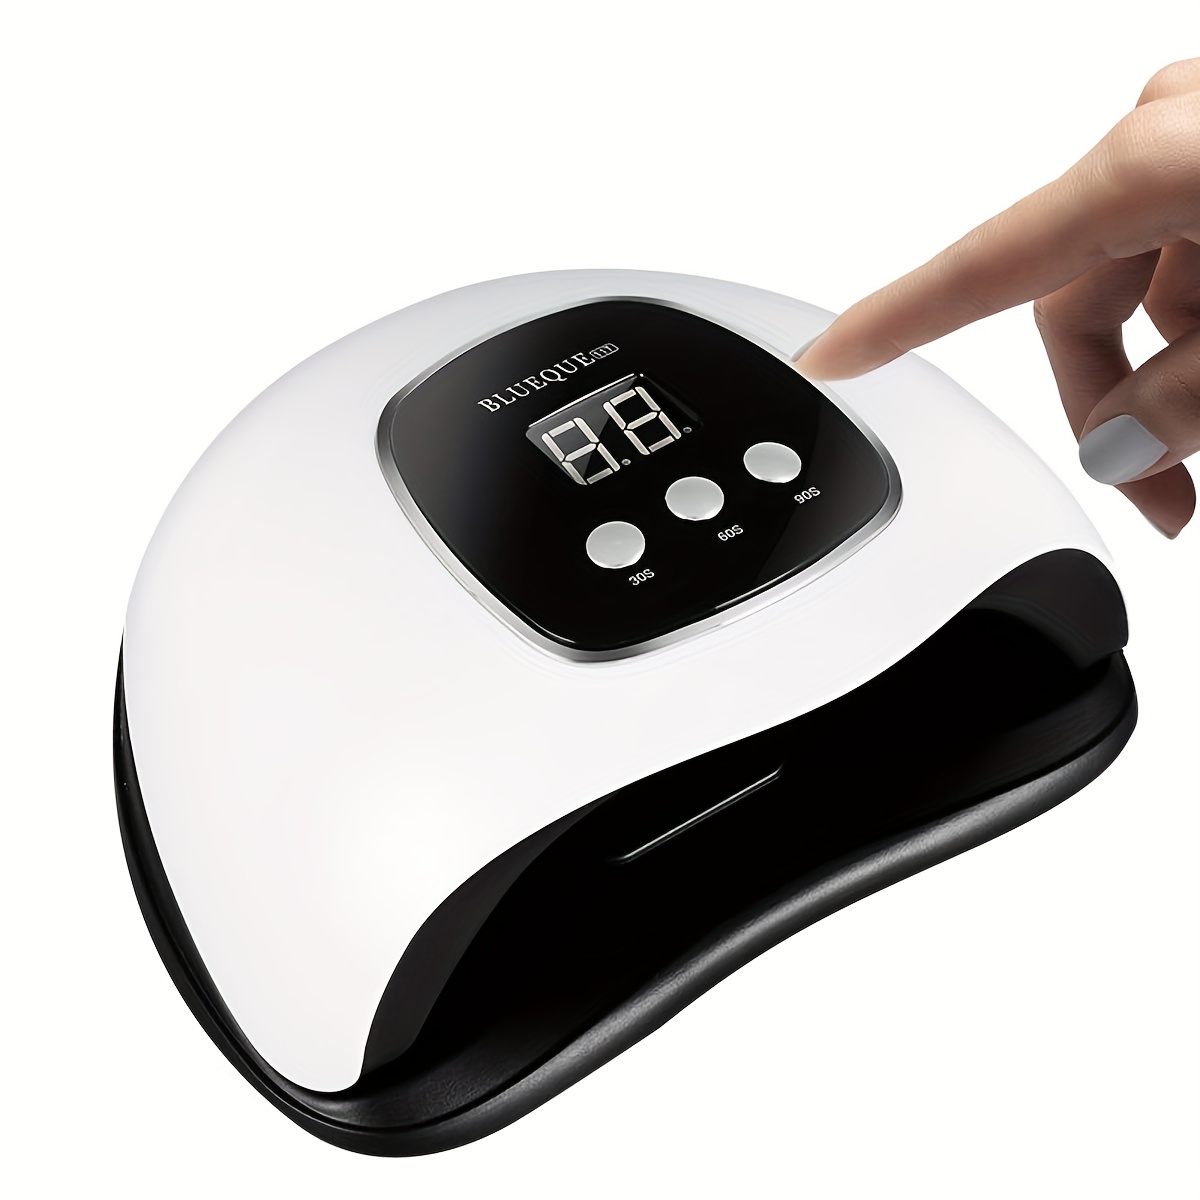 

Uv Led Nail Lamp 48w 24pcs Light Portable Professional Fast Curing Nail Dryer For Acrylic Nails Gel Polish Usb Rechargeable